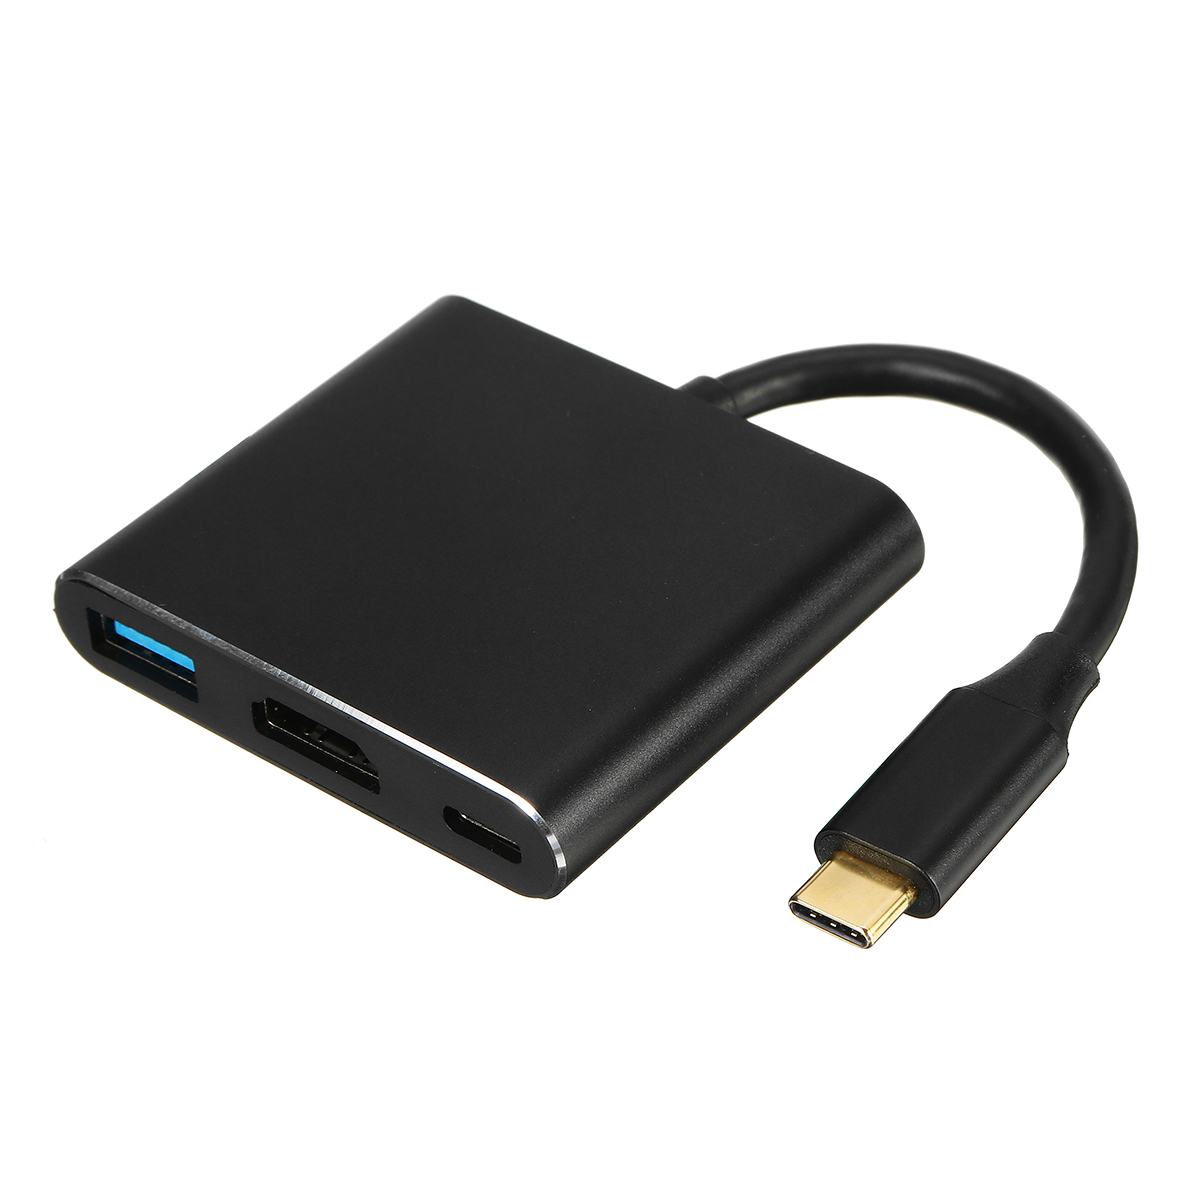 USB30-Docking-Station-Type-C-to-HDMI-USB-HUB-Adapter-Support-4K-30HZ-for-Notebook-MacBook-Expansion--1688311-5